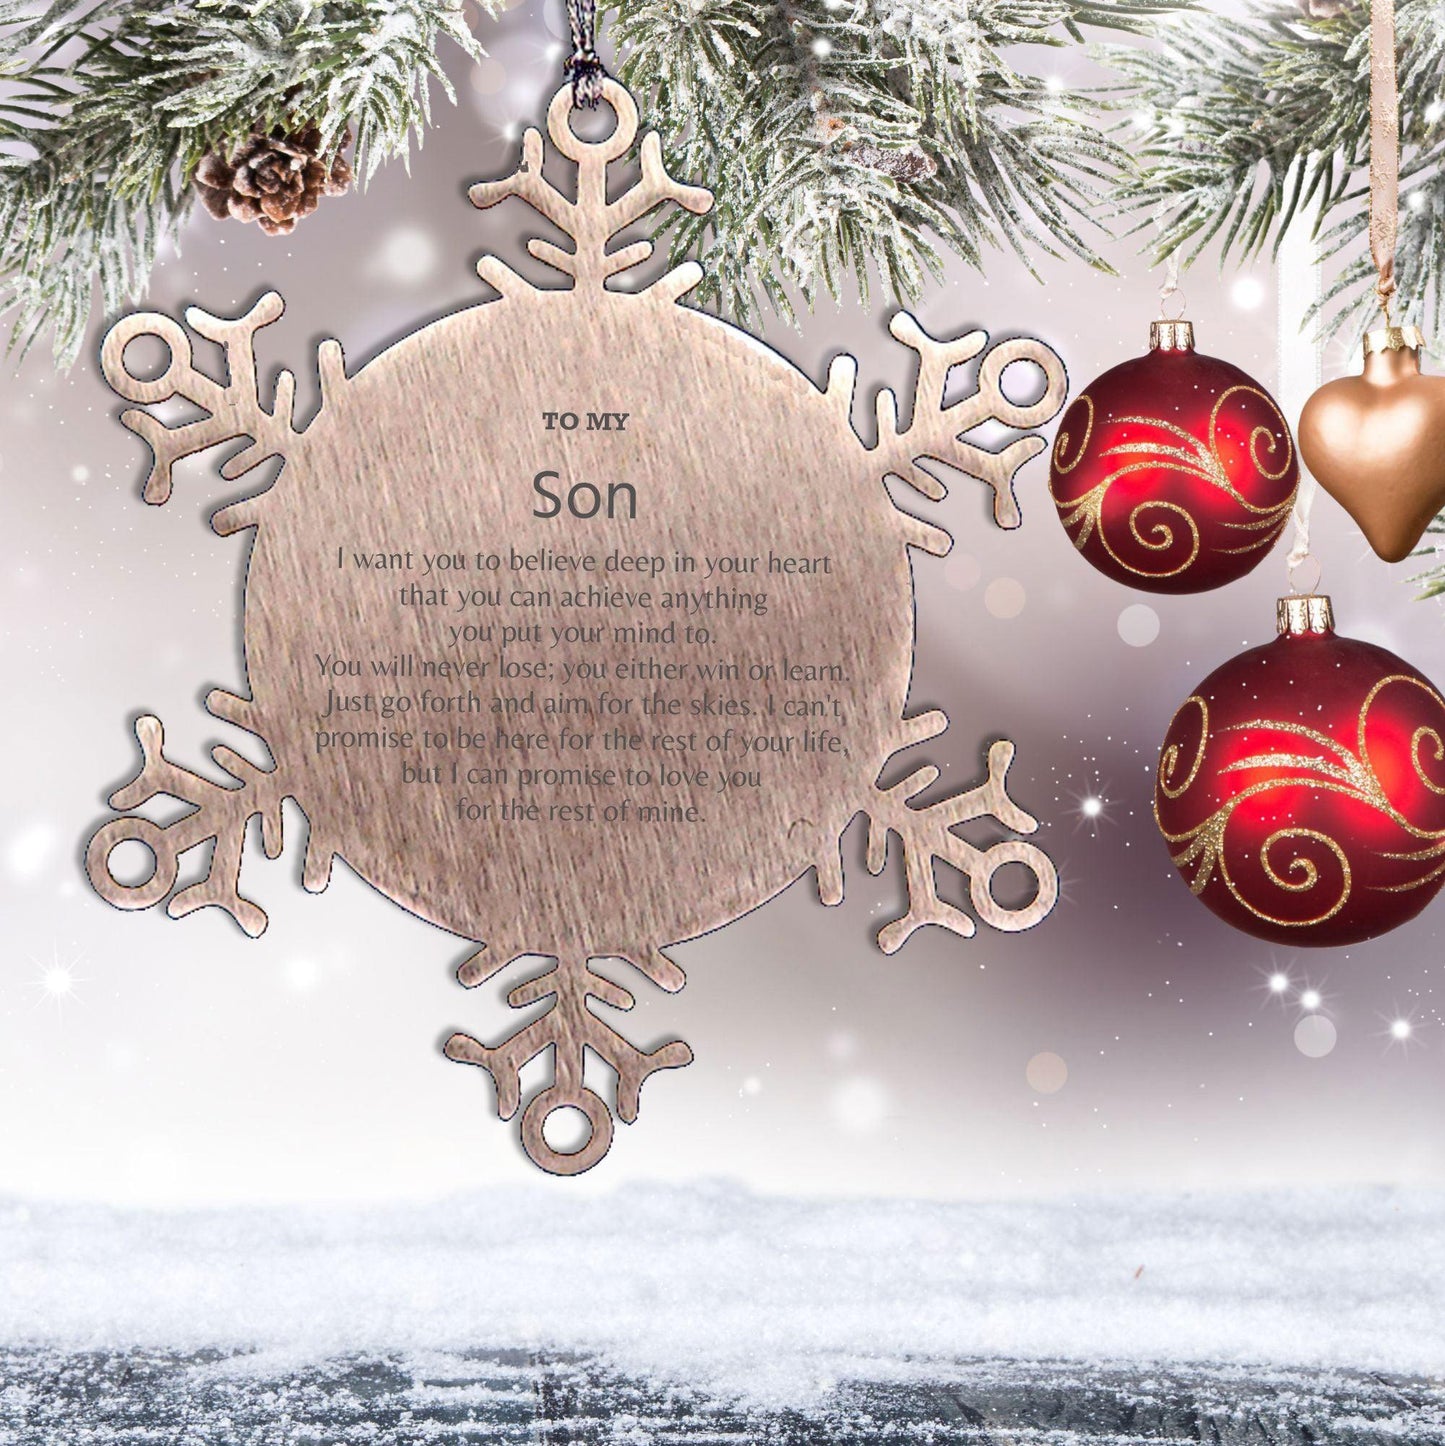 Motivational Son Snowflake Ornament, Son I can promise to love you for the rest of mine, Christmas Ornament For Son, Son Gift for Women Men - Mallard Moon Gift Shop